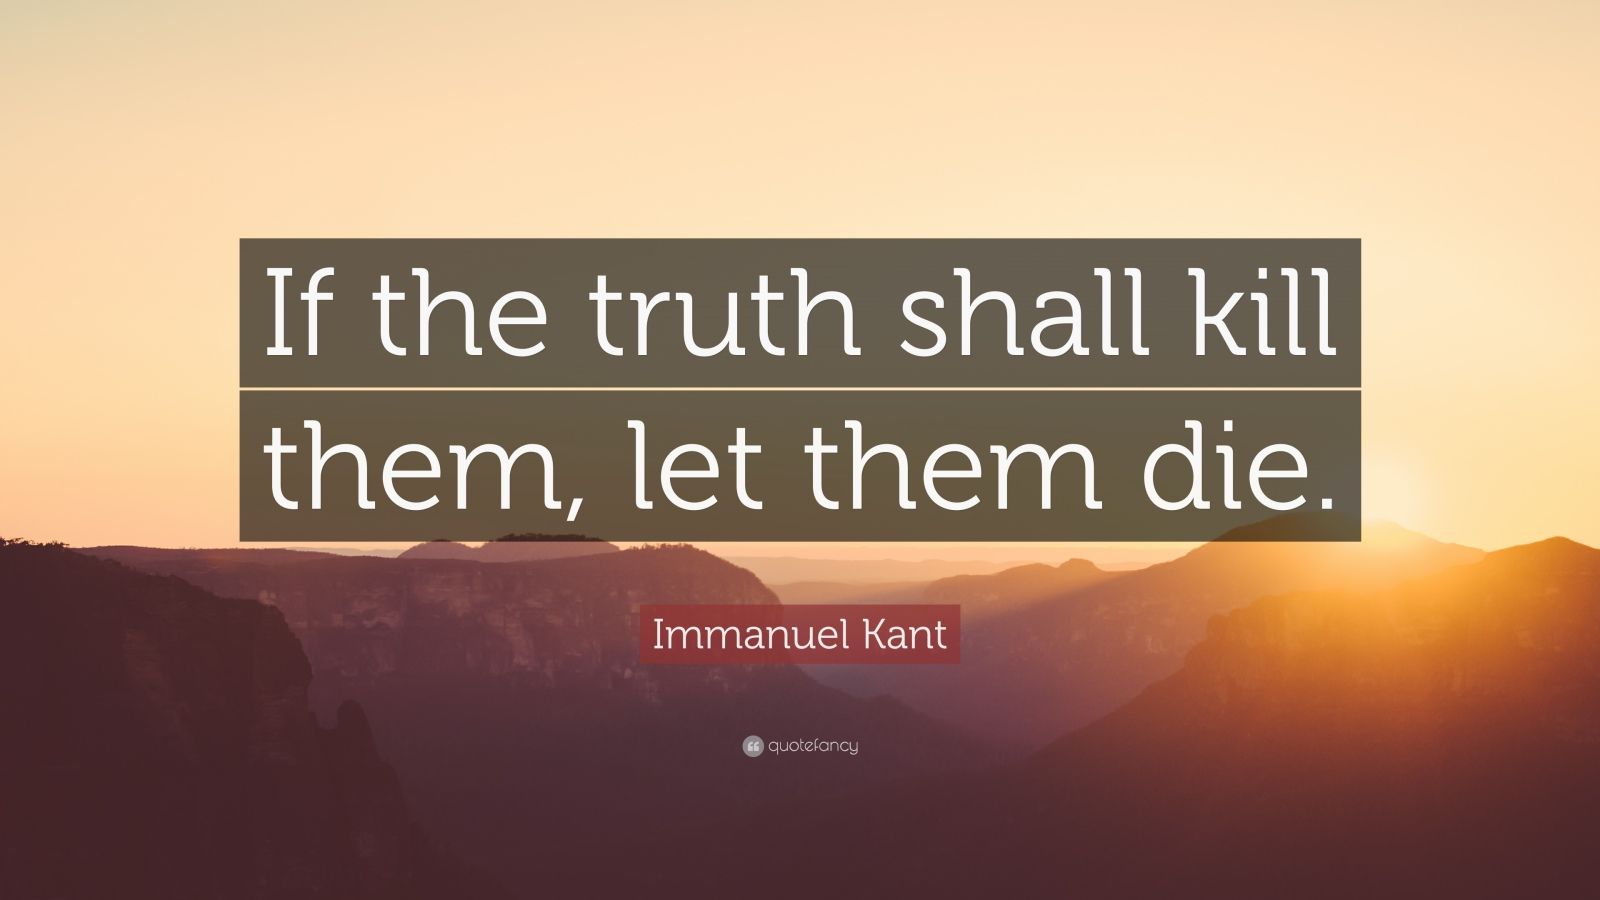 Immanuel Kant Quote: “If the truth shall kill them, let them die.”